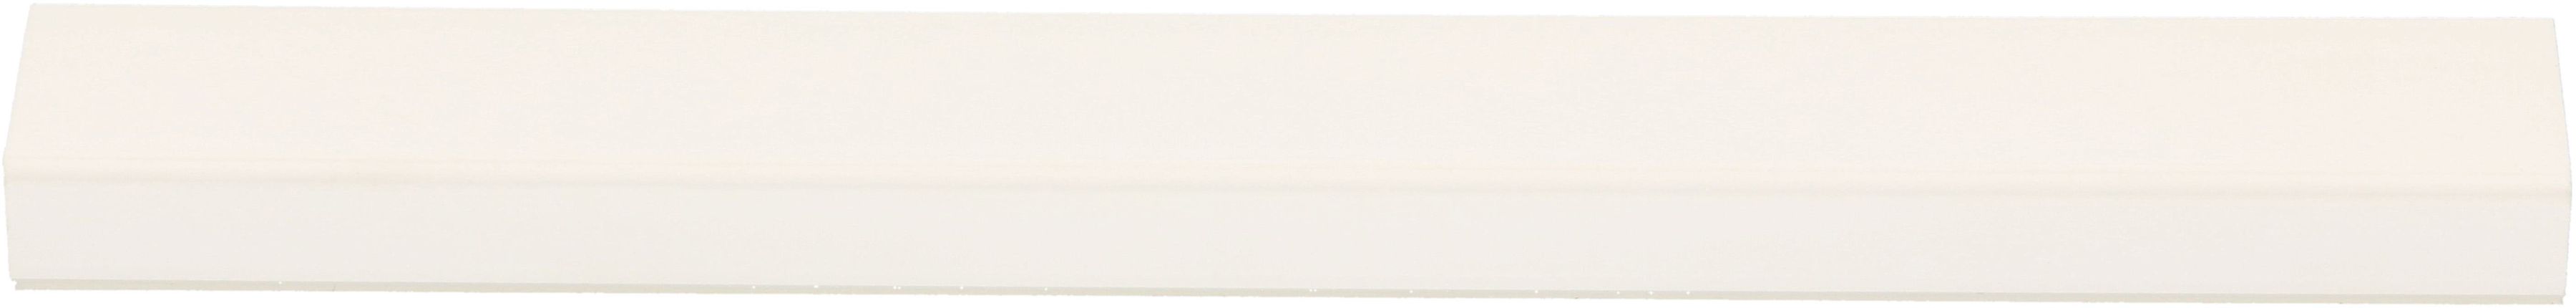 Cable duct white 21x11,5mm self-adhesive